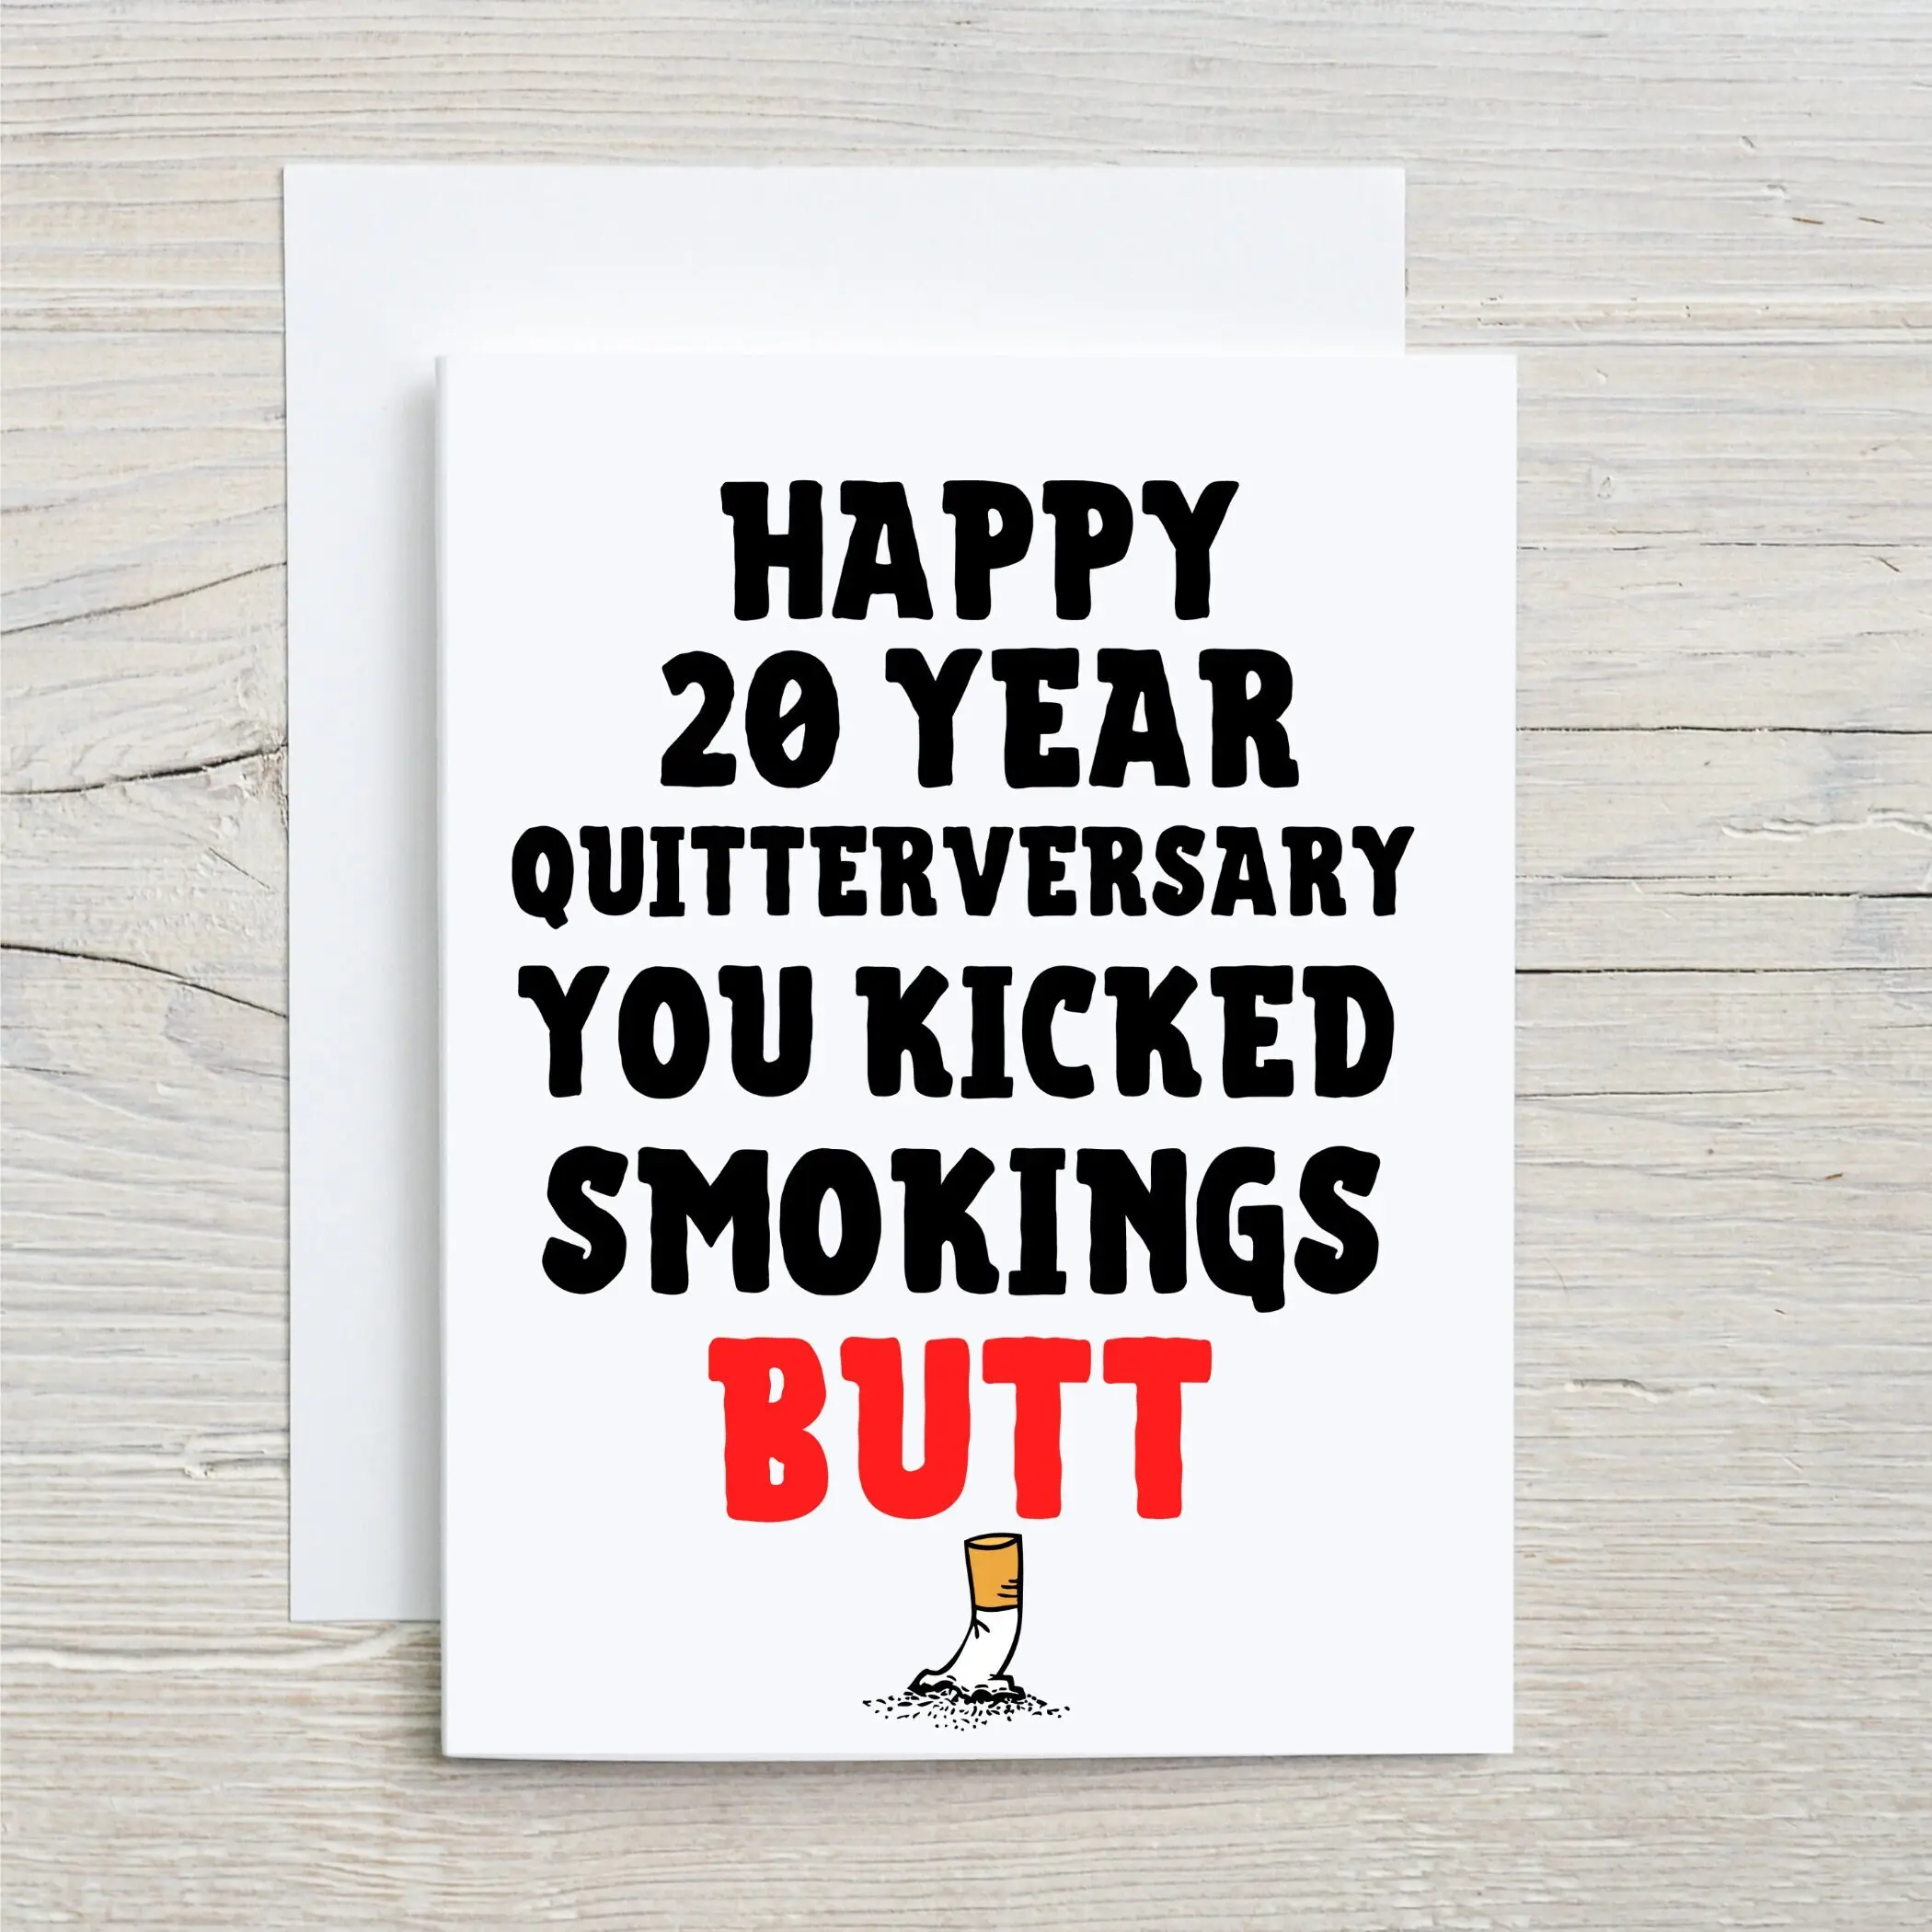 smoked for 20 years and quit - Is it too late to quit smoking after 15 years